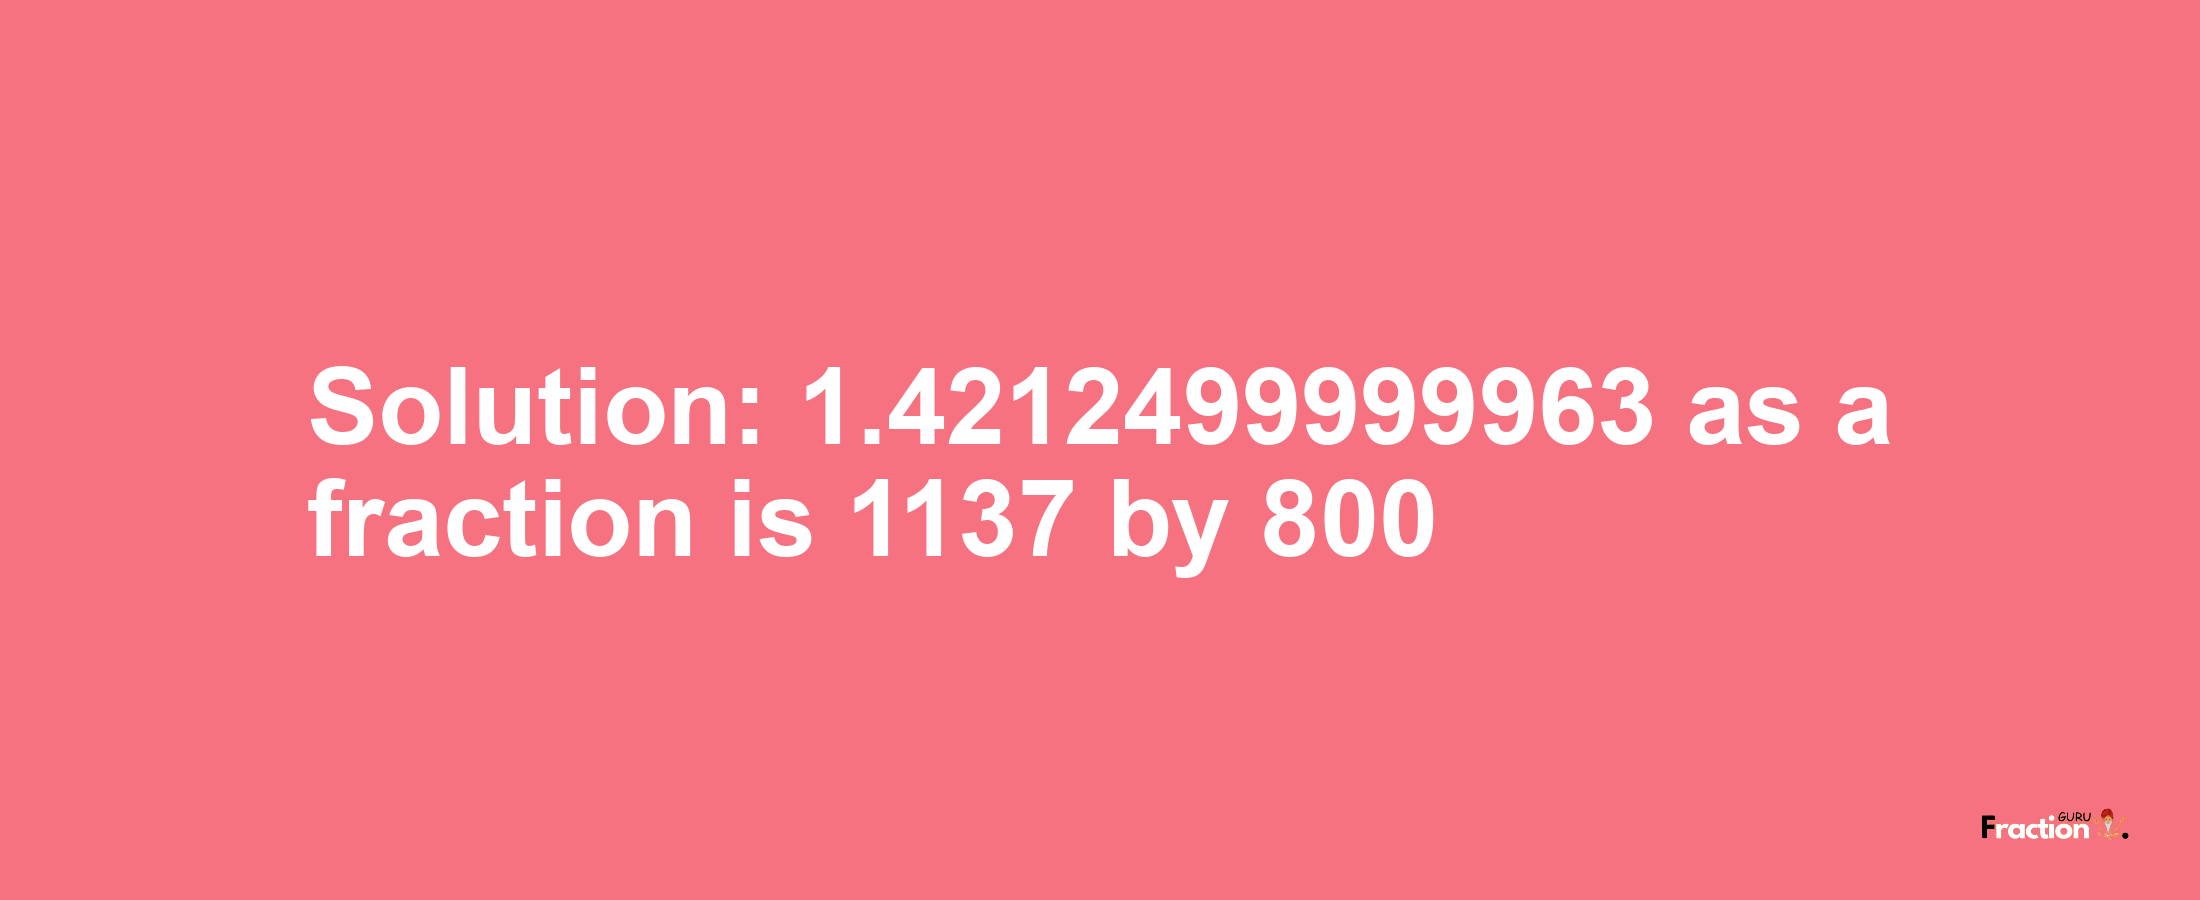 Solution:1.4212499999963 as a fraction is 1137/800